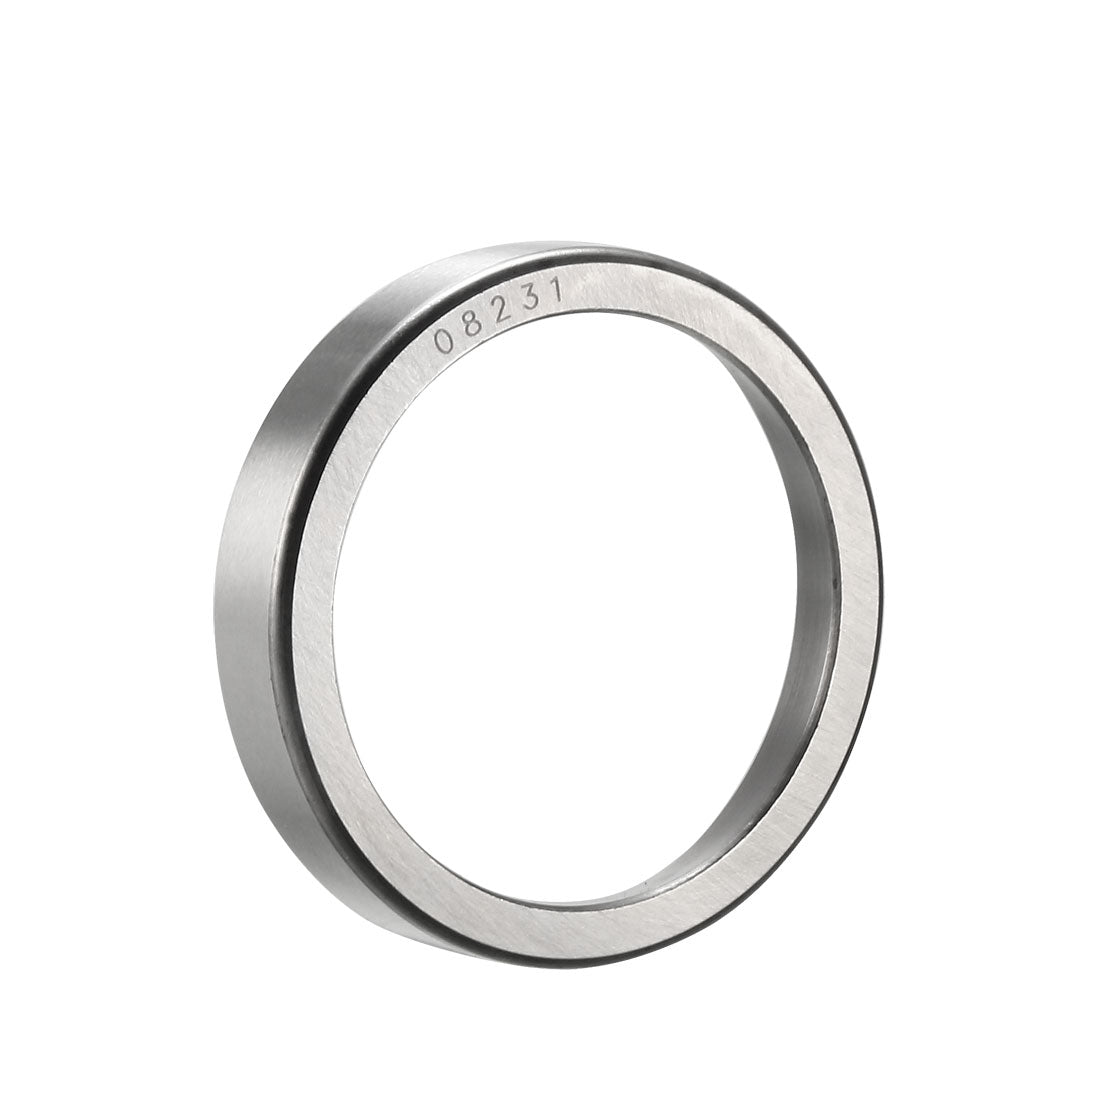 Uxcell Uxcell 08231 Tapered Roller Bearing Outer Race Cup 2.3125" O.D., 0.4219" Width